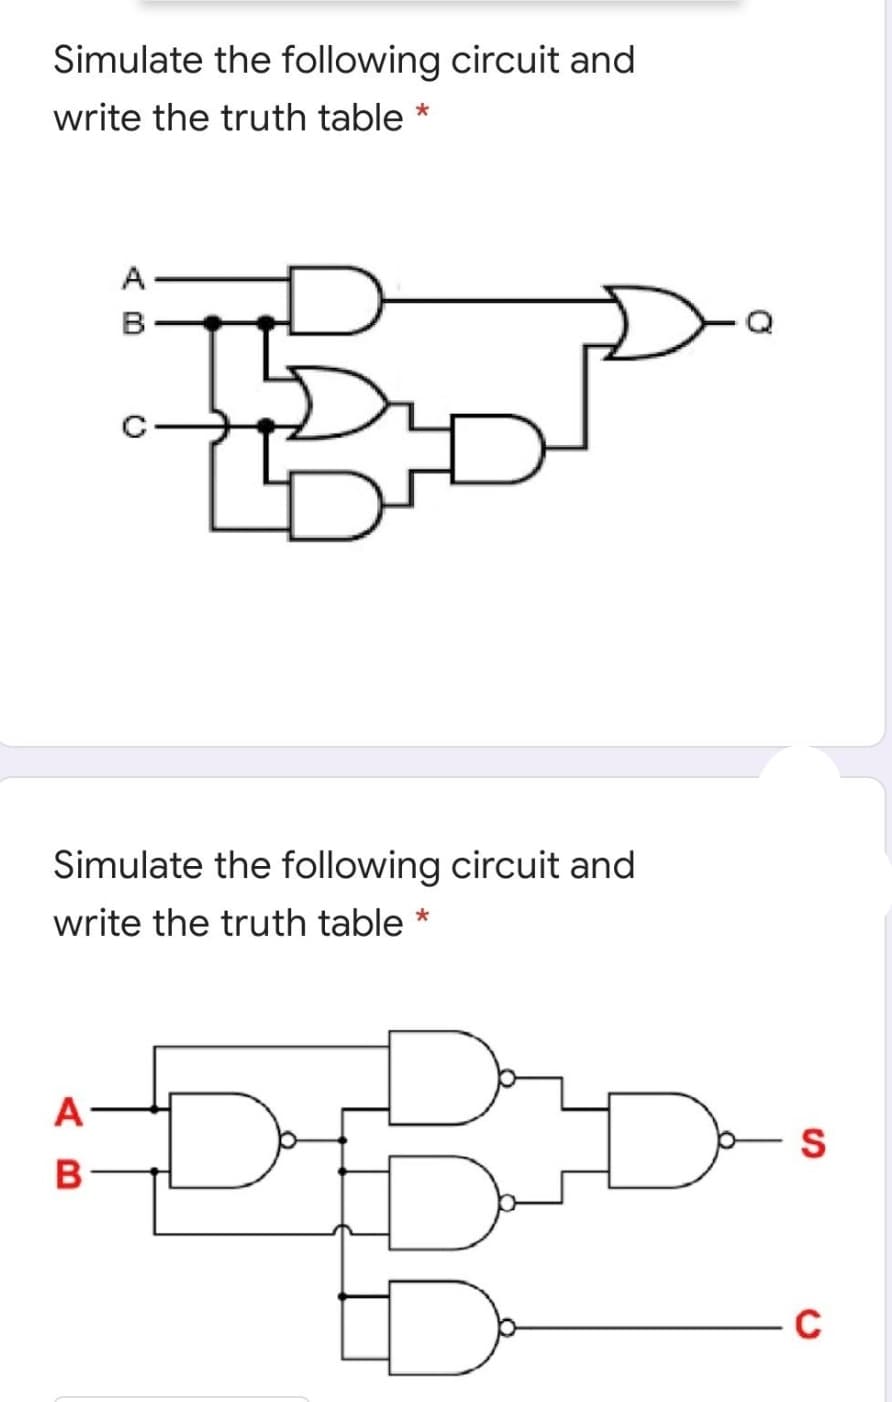 Simulate the following circuit and
write the truth table *
A
B.
C-
Simulate the following circuit and
write the truth table
A
C
